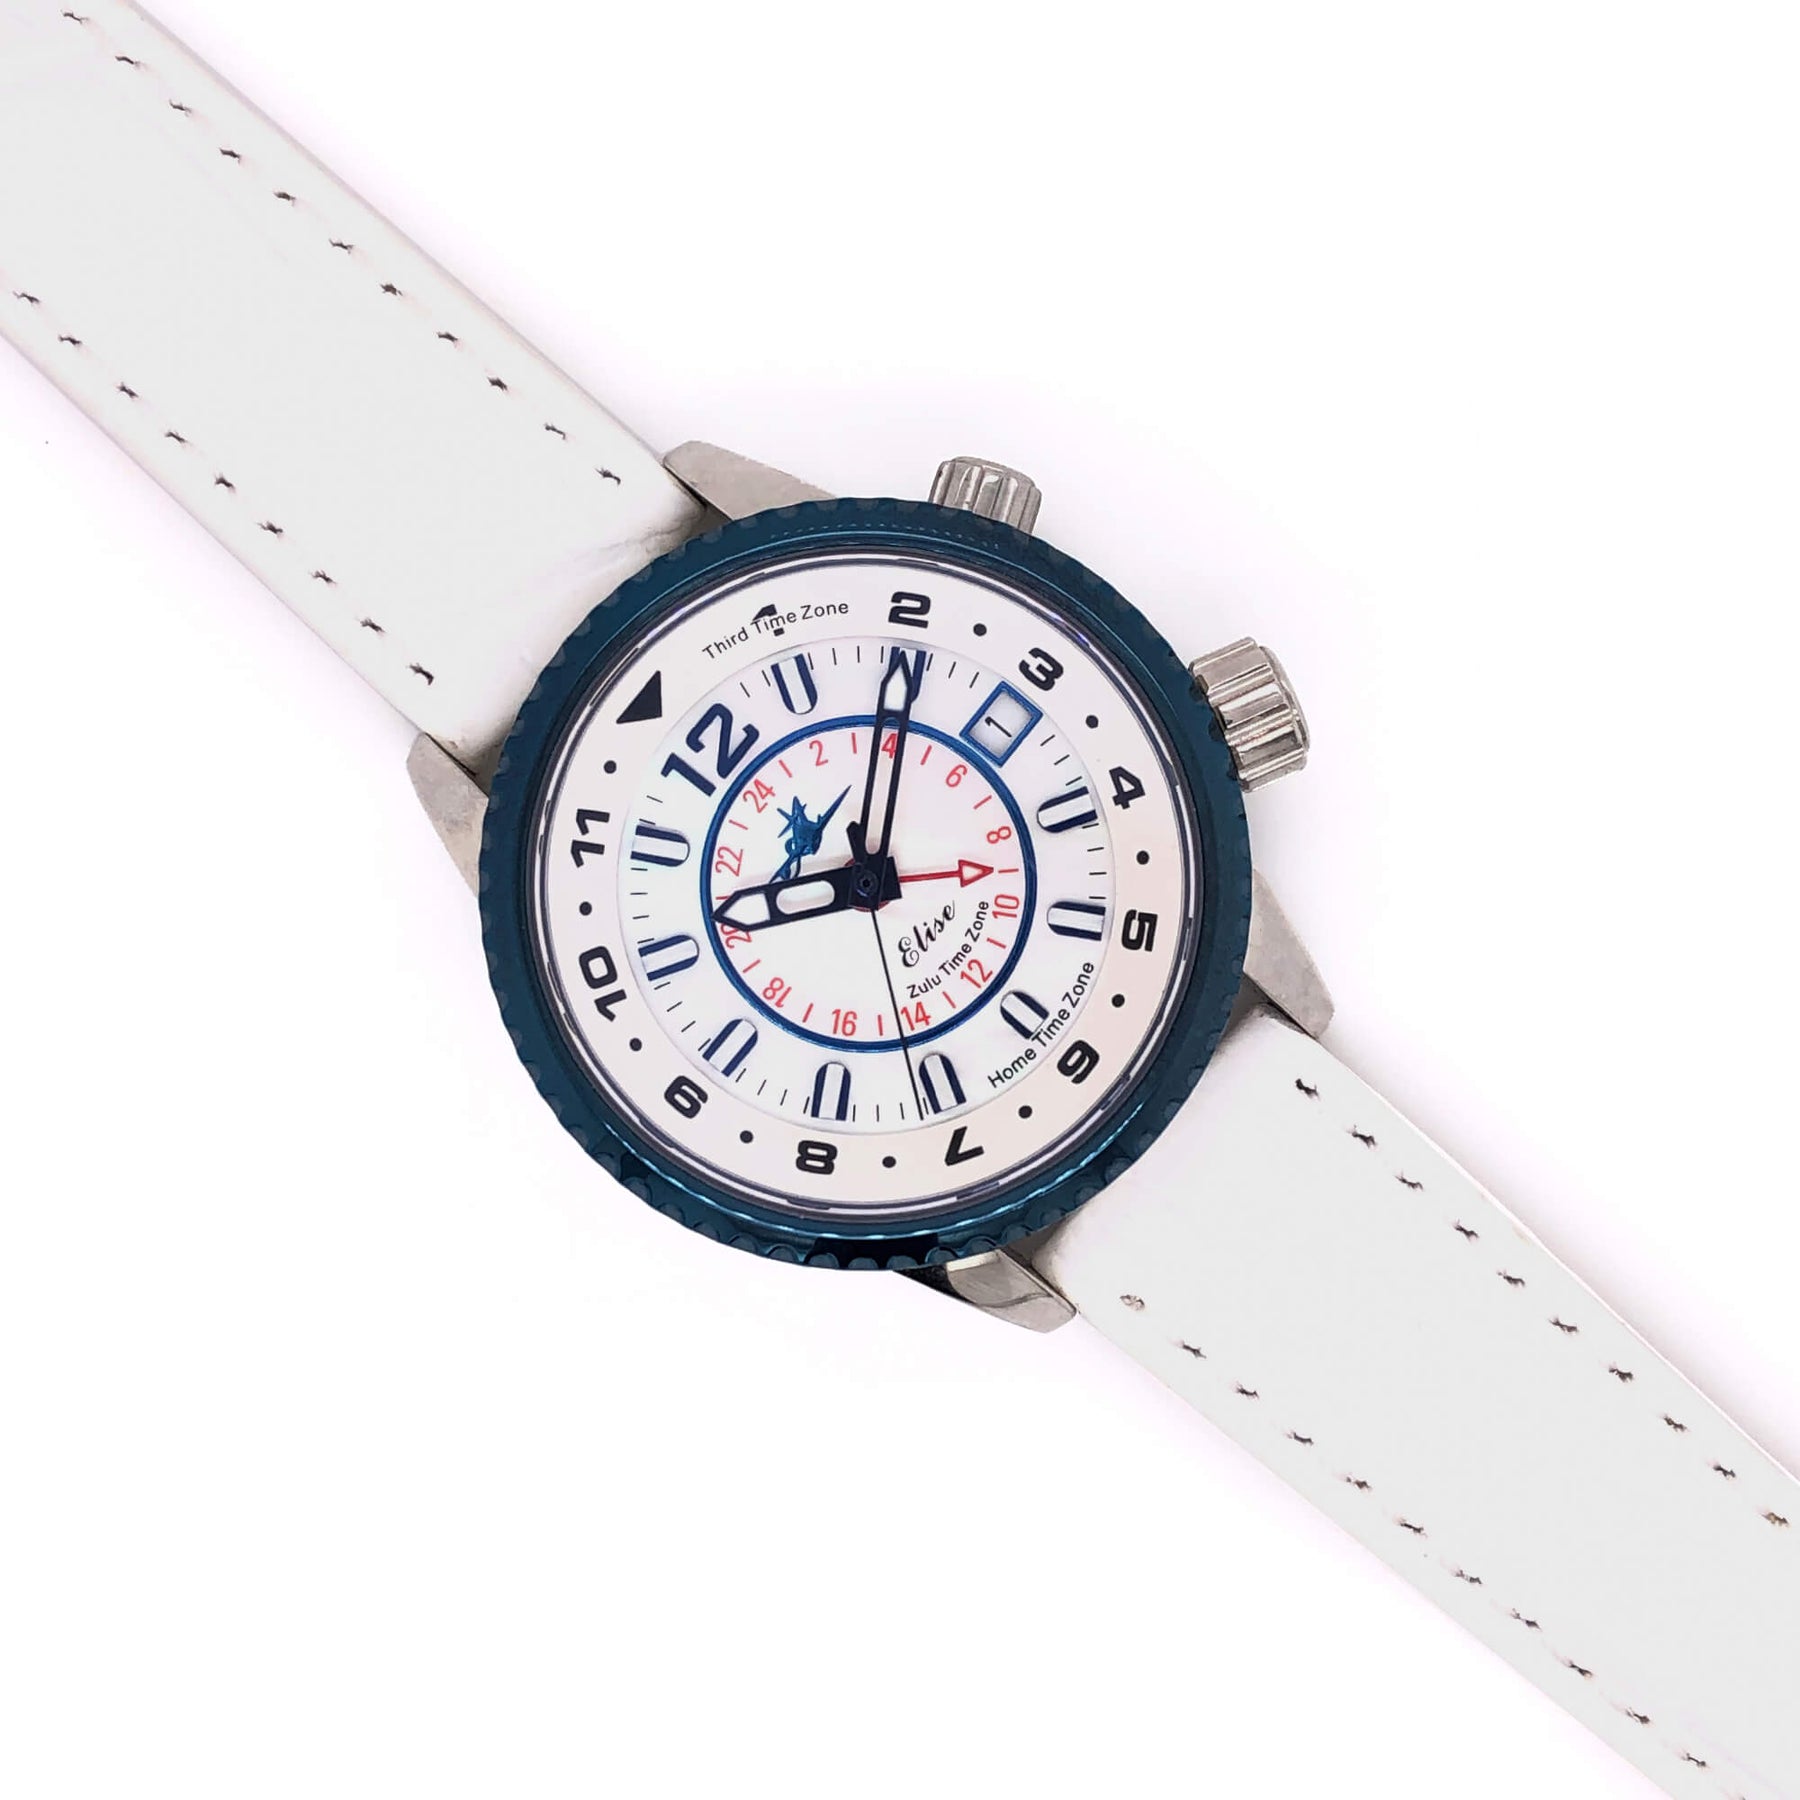 BAND - 16mm White Leather Band with Silver Buckle on a white dial watch - The Abingdon Co., aviation, dive, tactical watches for women